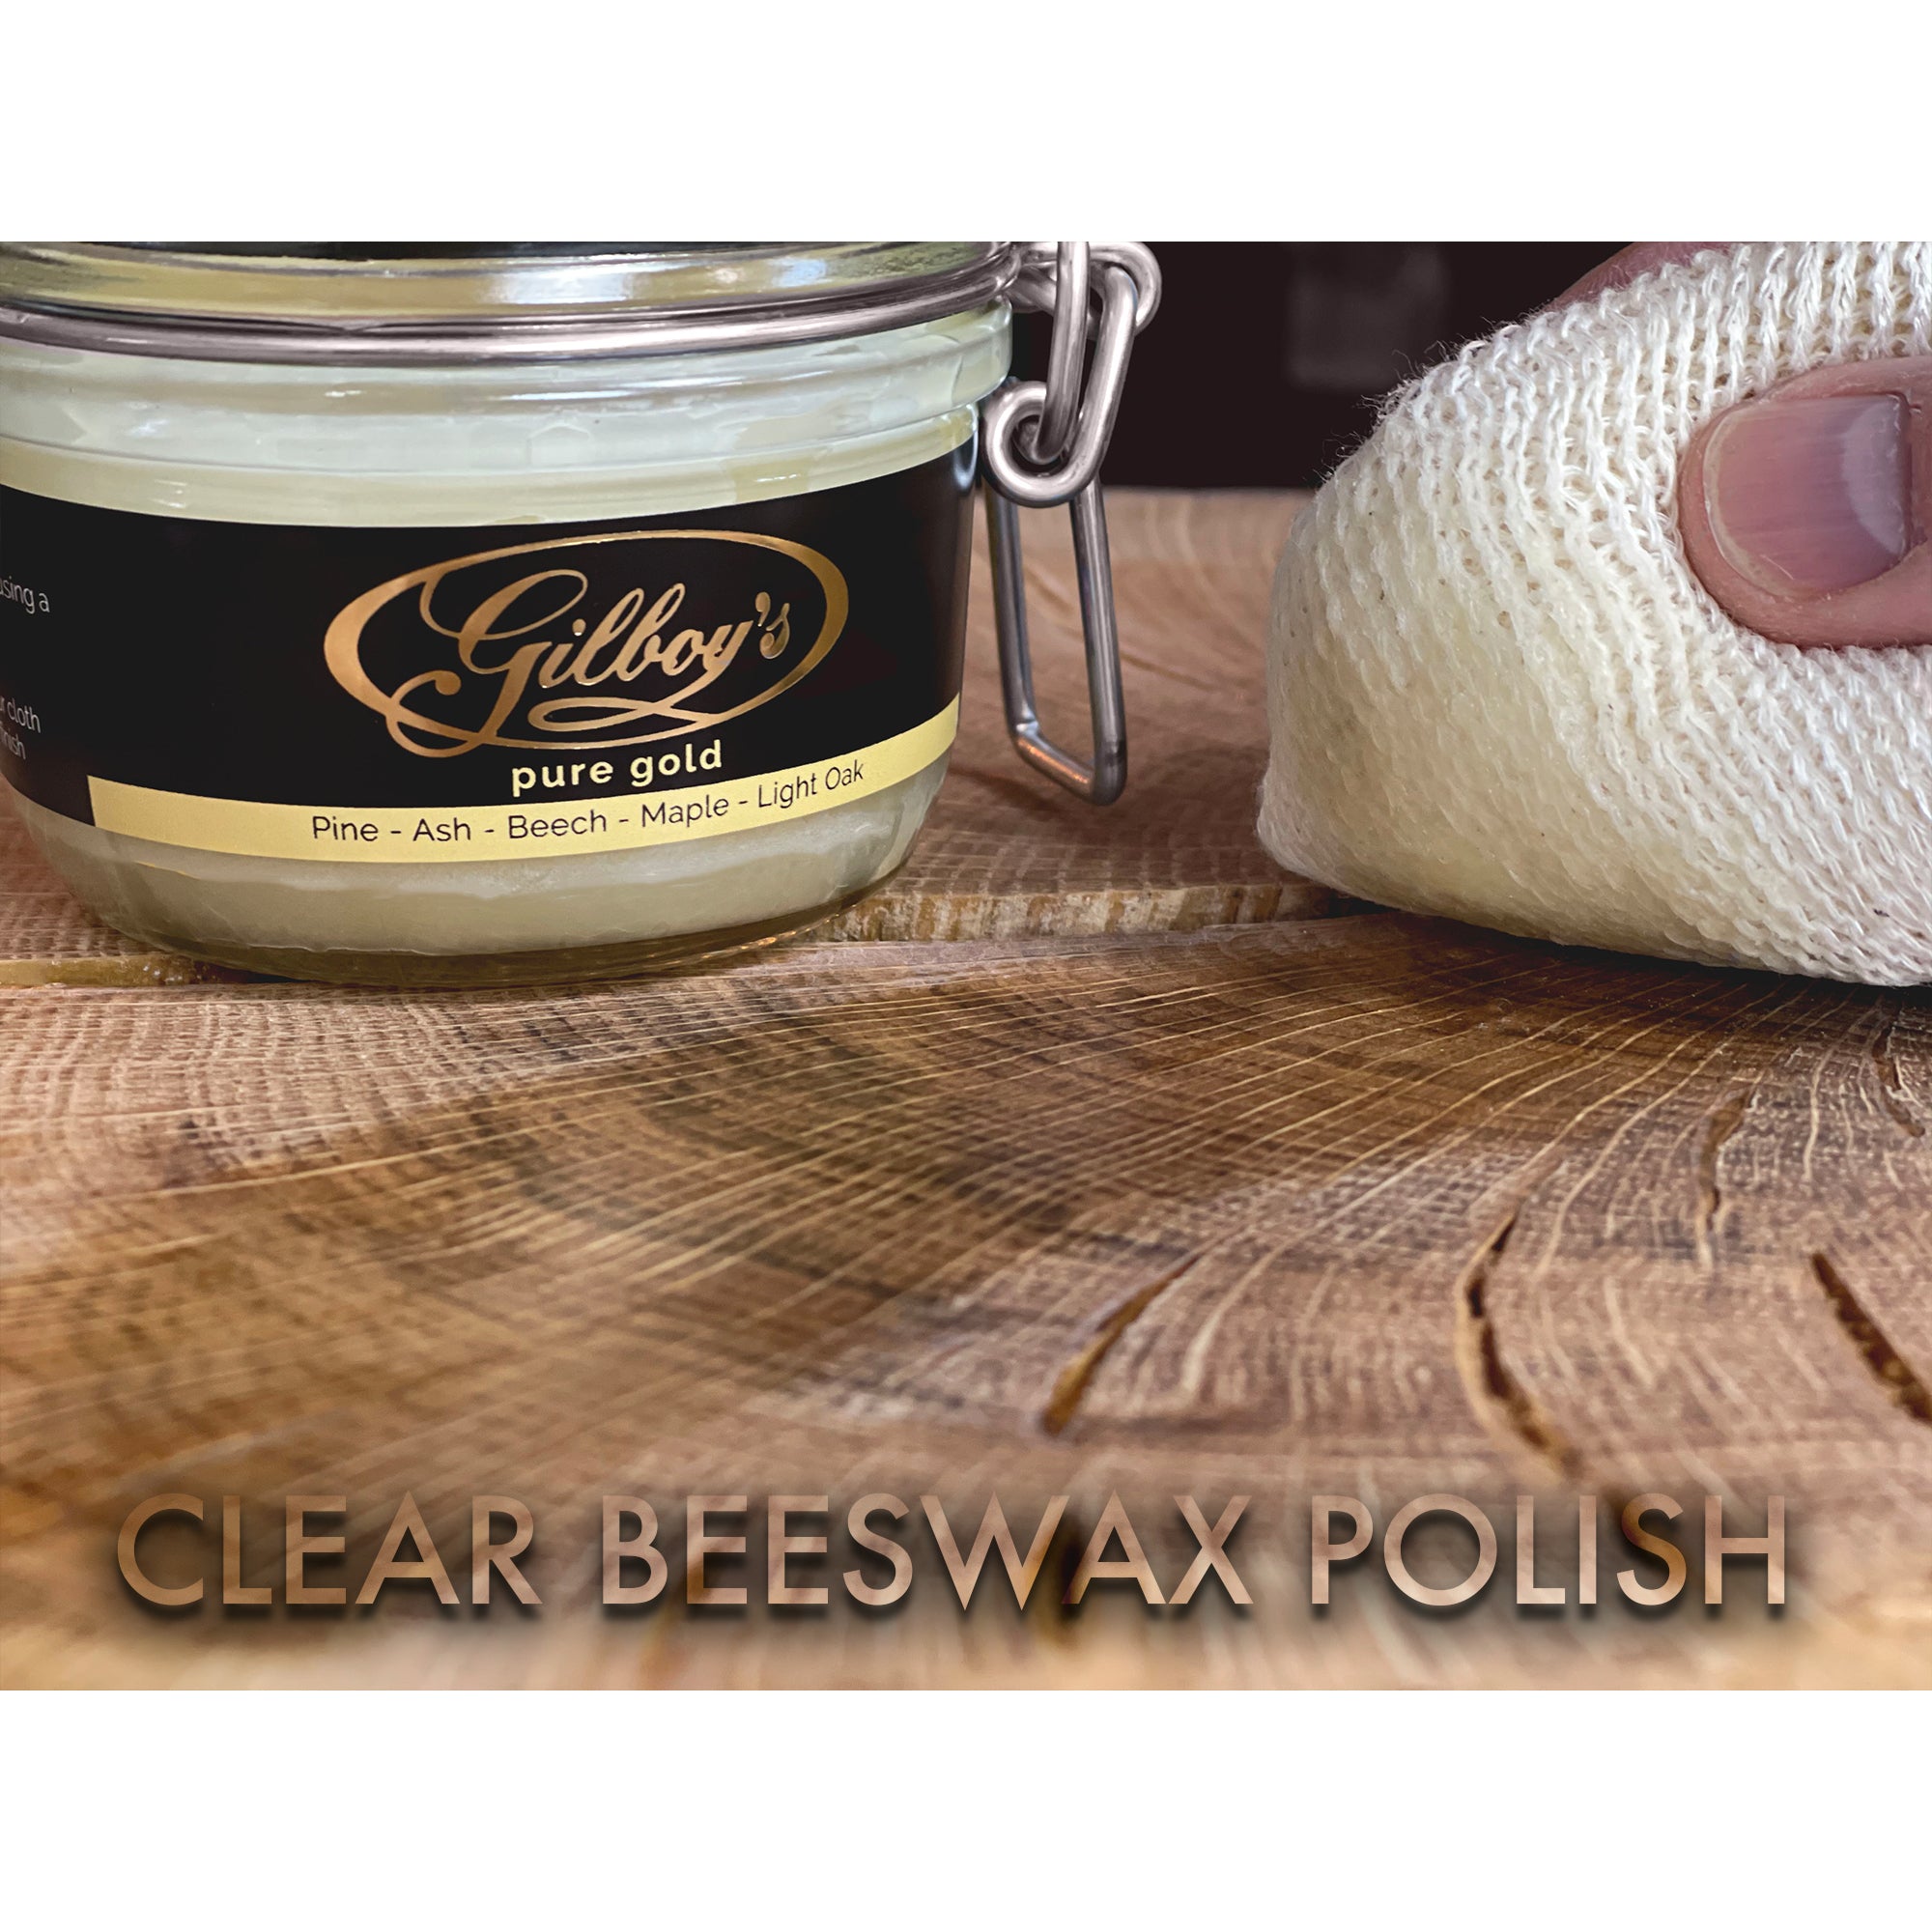 Pure Gold Clear beeswax polish on bare wood